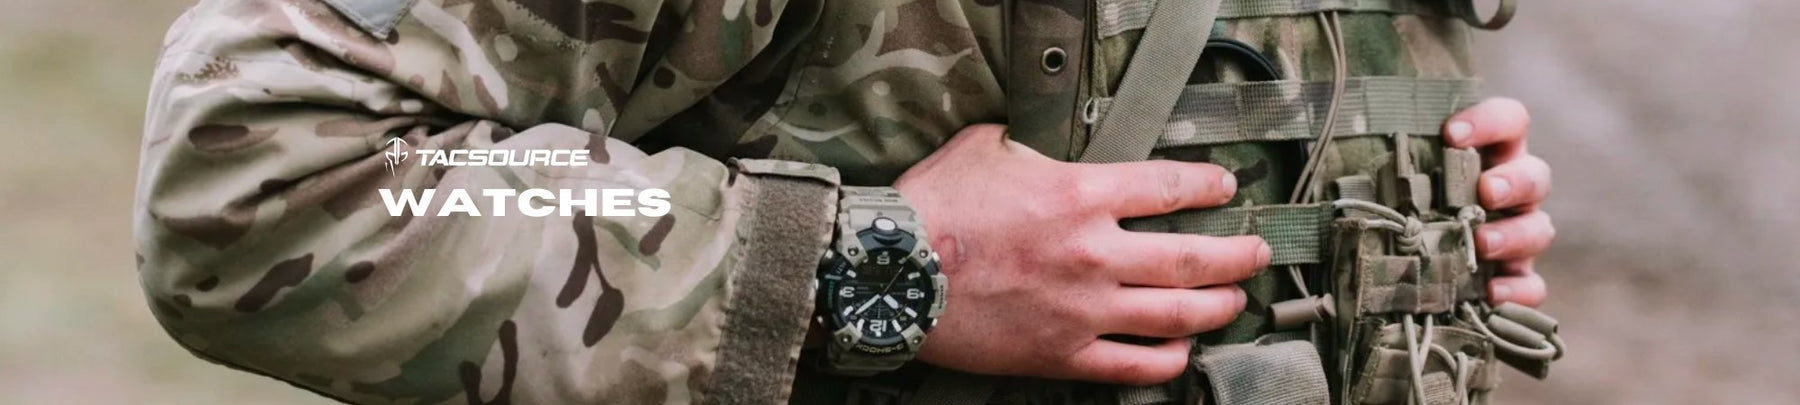 TacSource Military Watches